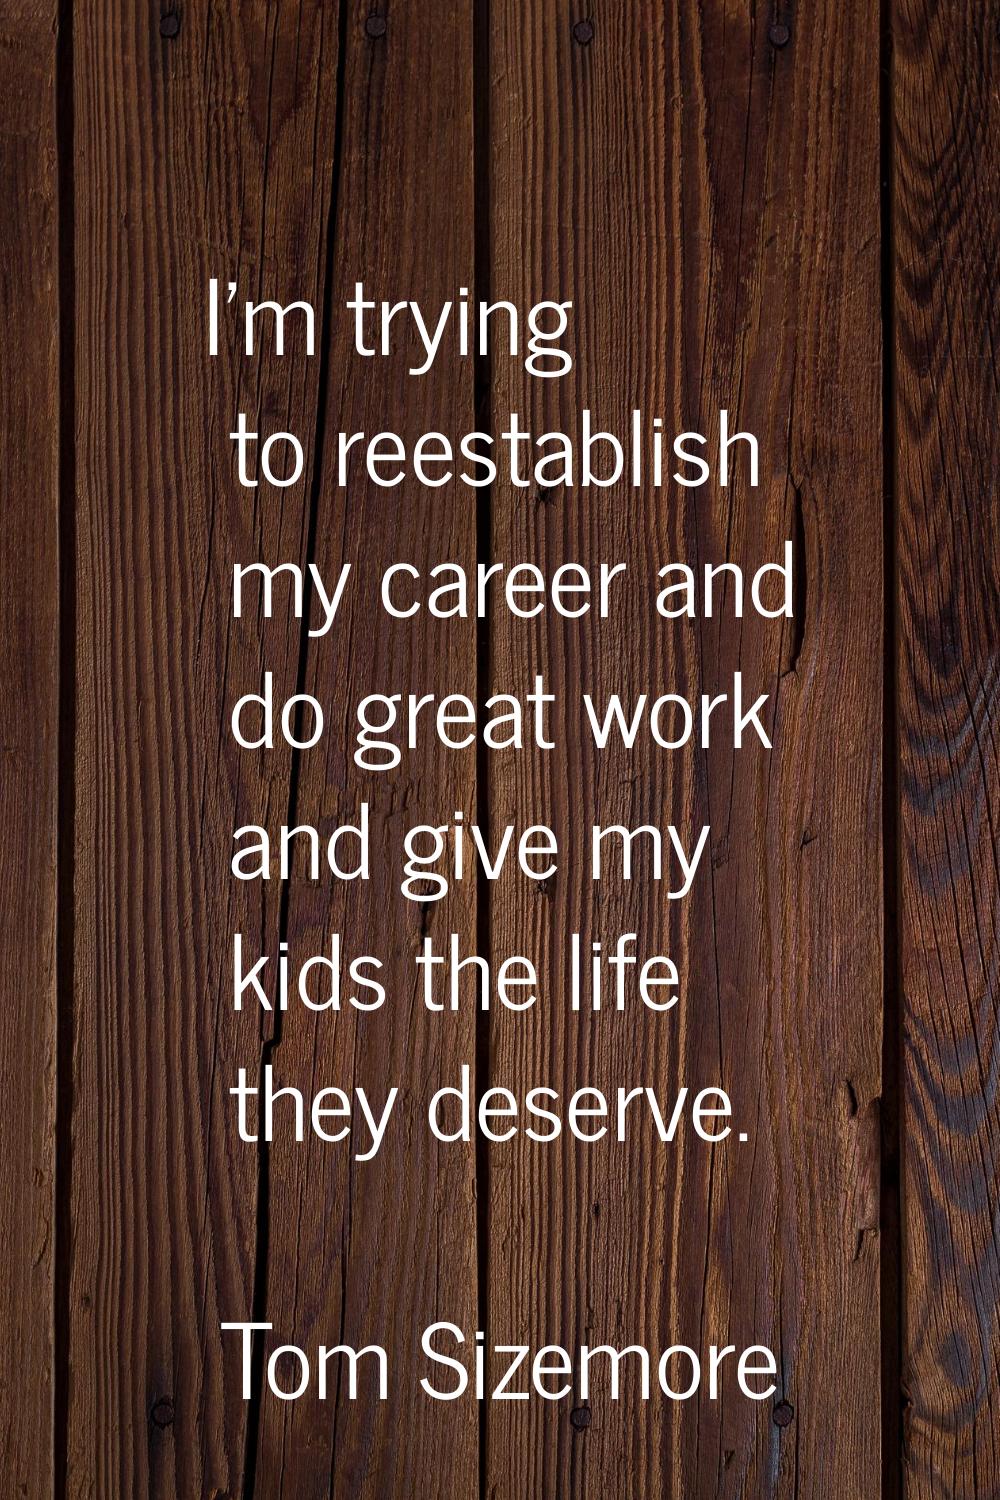 I'm trying to reestablish my career and do great work and give my kids the life they deserve.